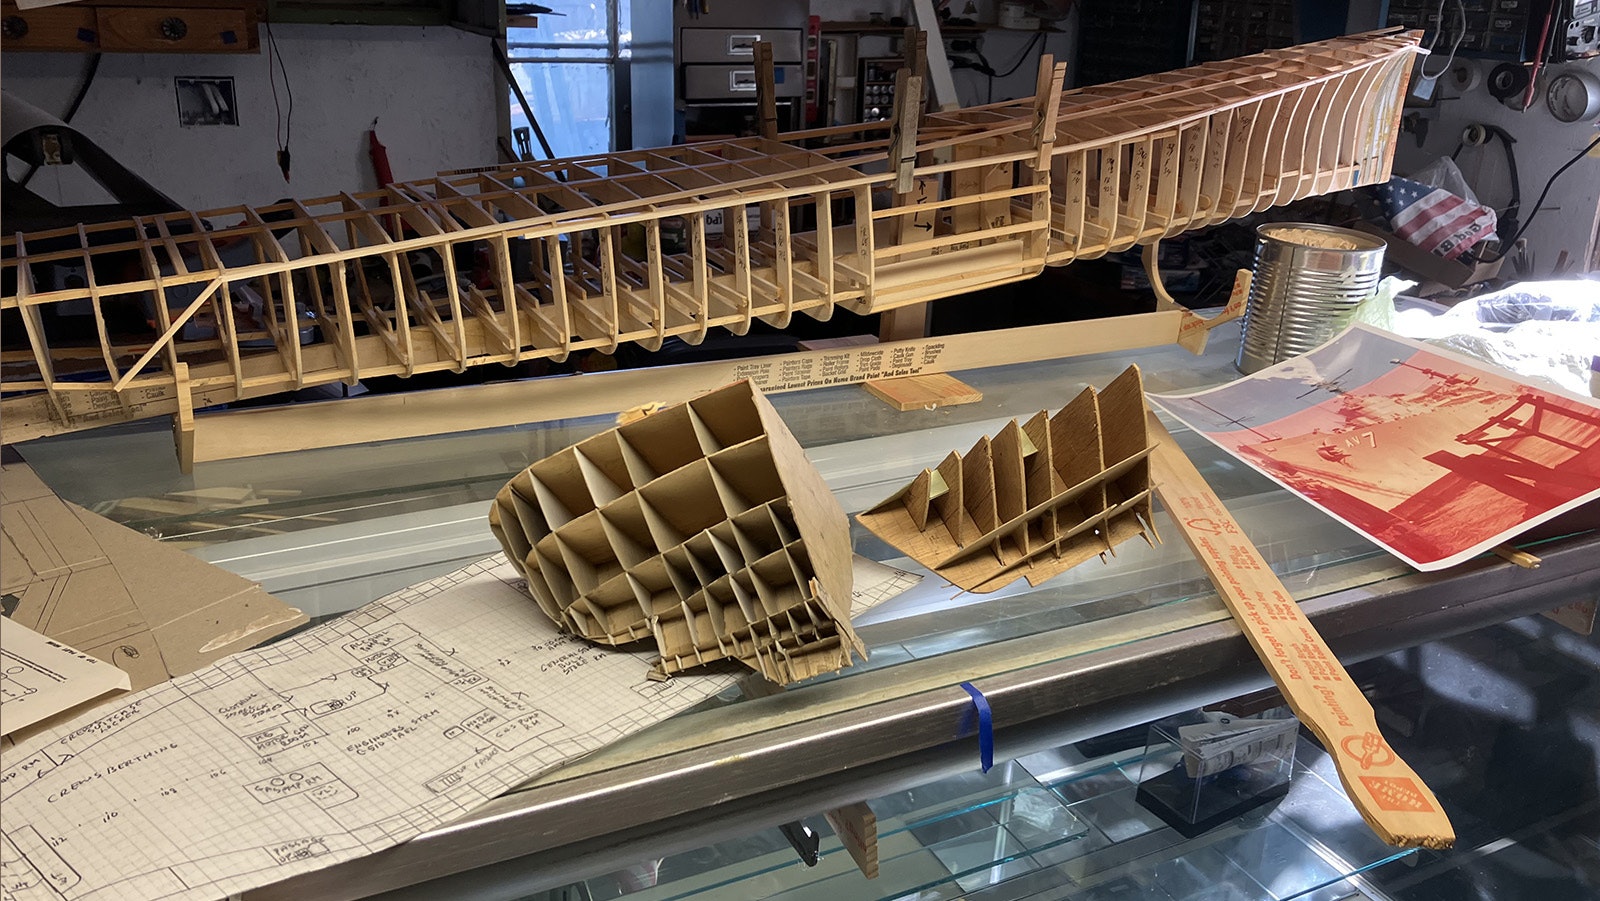 Blueprints and the beginning of a detailed model of the USS Currituck sit in Gene Dickerson’s workshop. He has made several detailed models of ships that were part of his career.